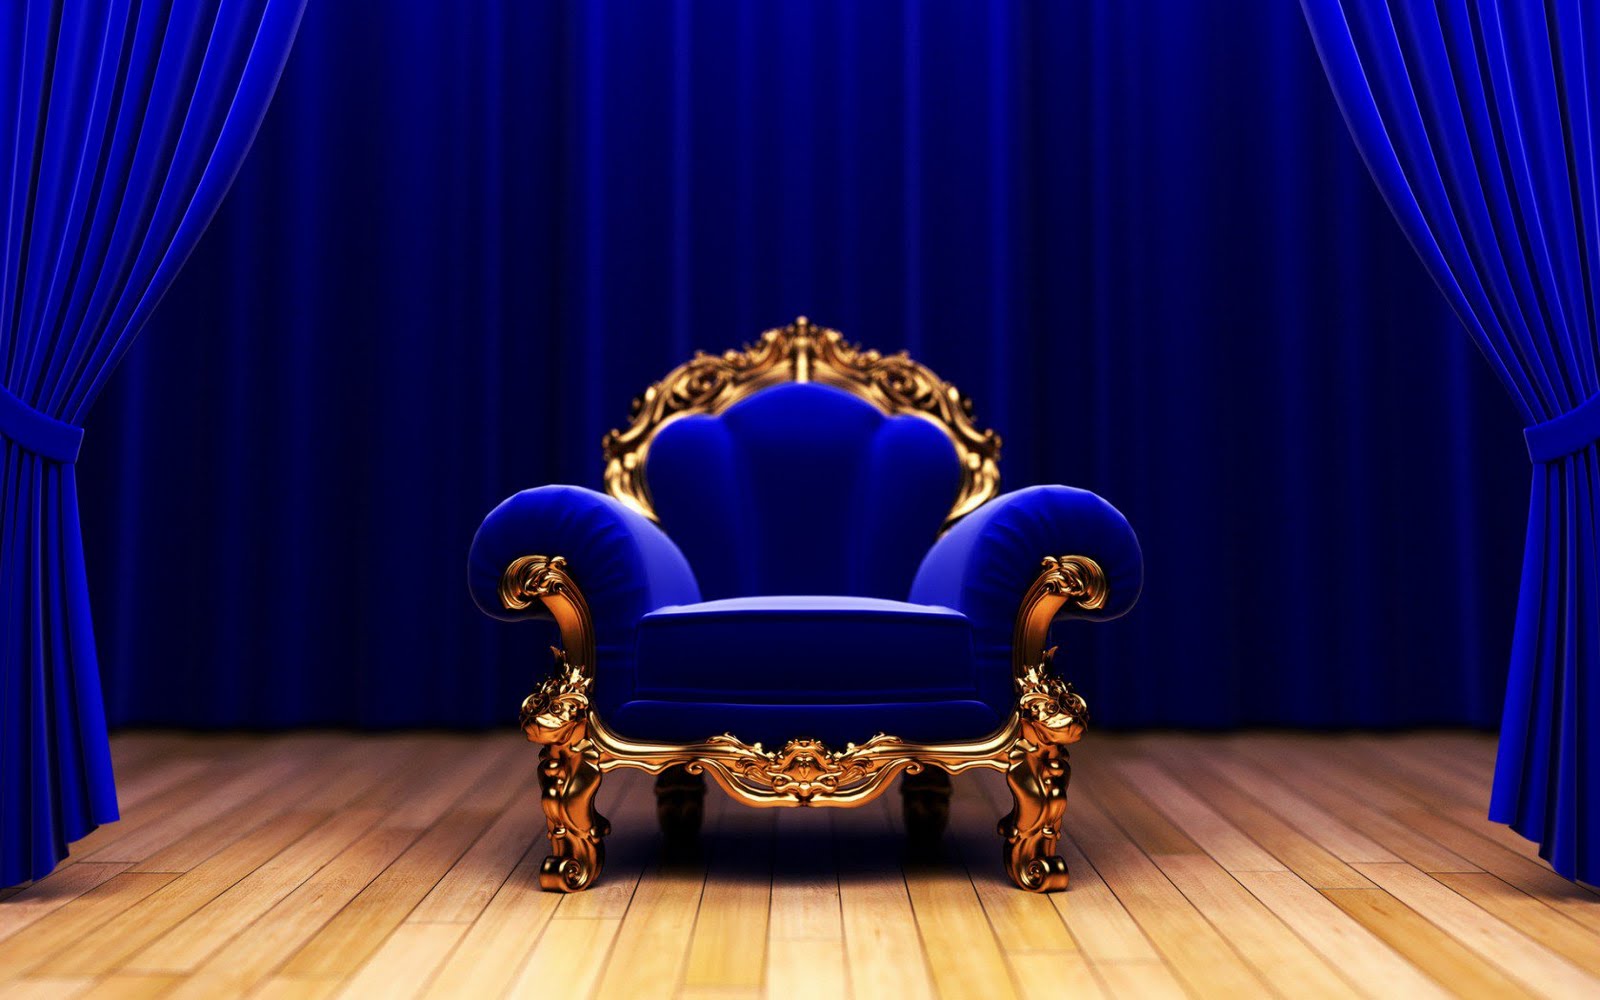 The Royal Chair Mhhh Don T You Wish It Could Be Seating On